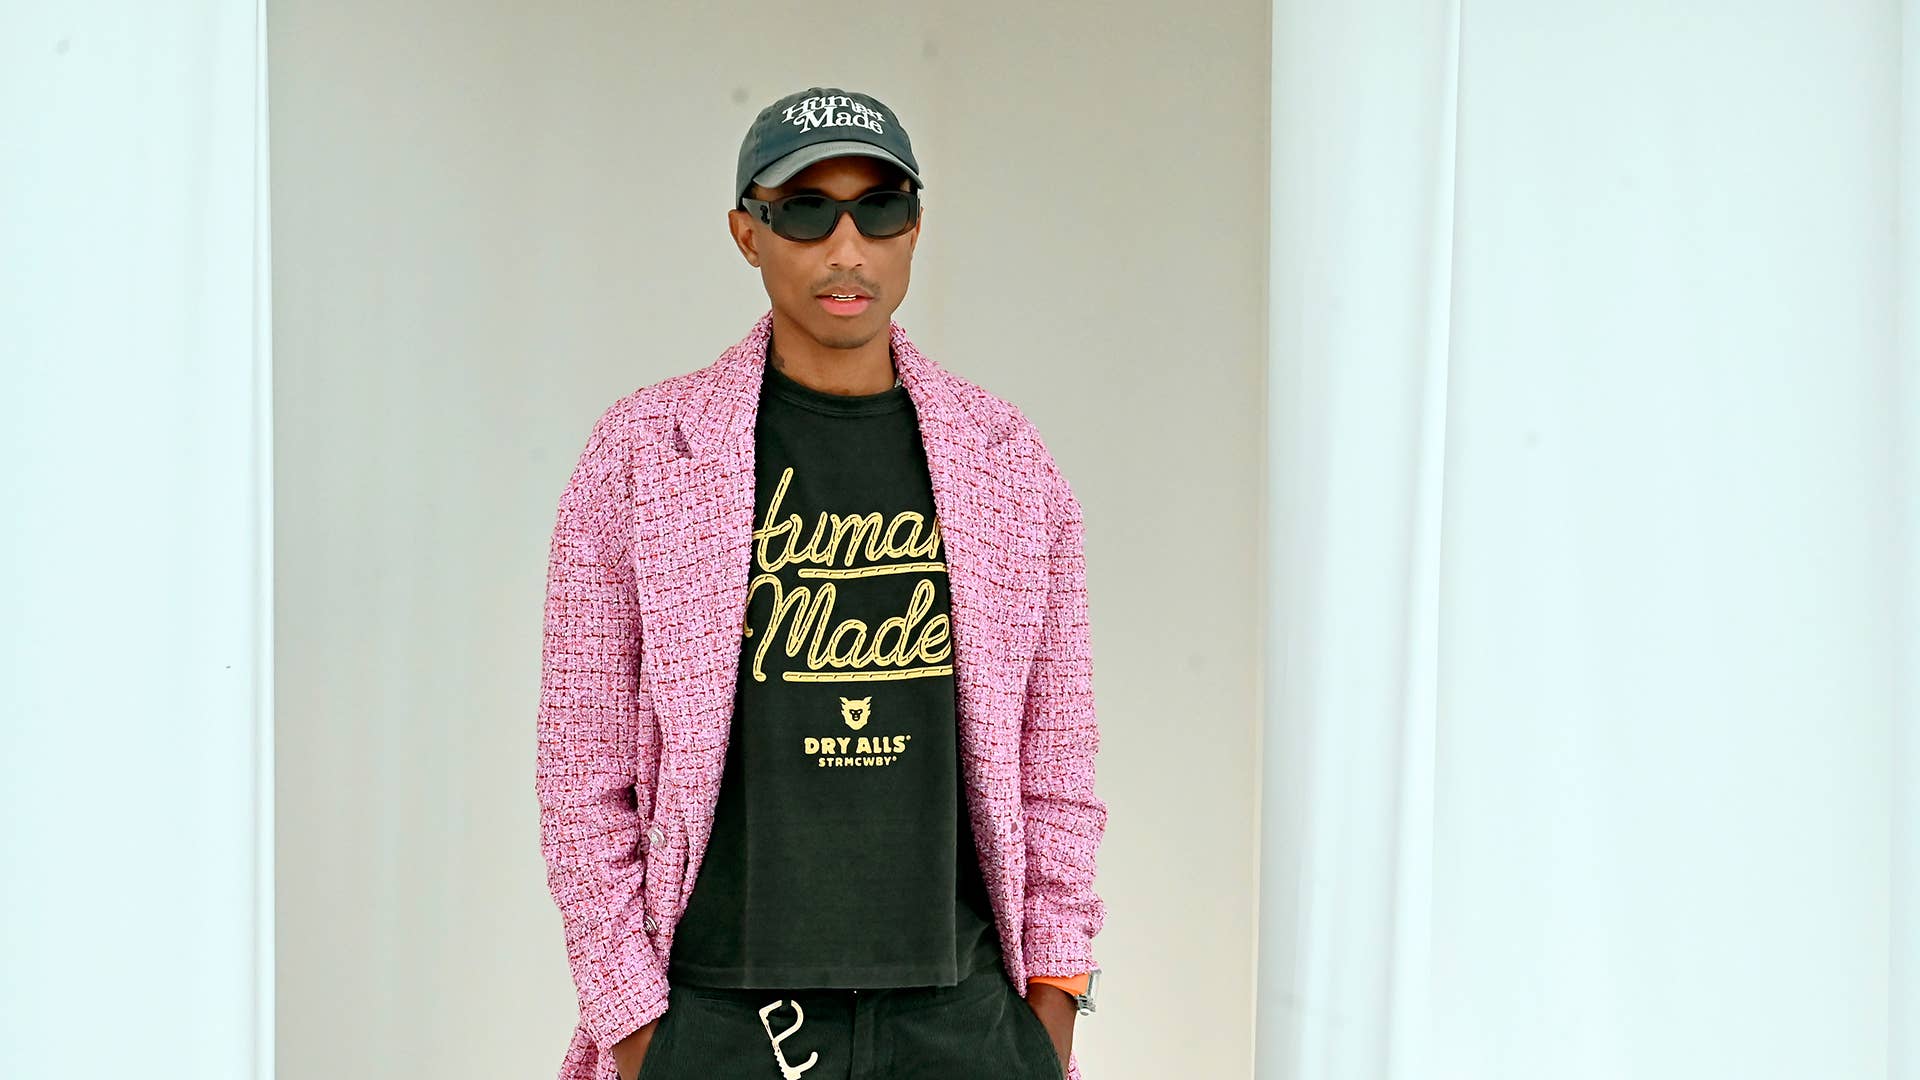 Celebrity Style: Pharrell Williams Wears Chanel Sunglasses To